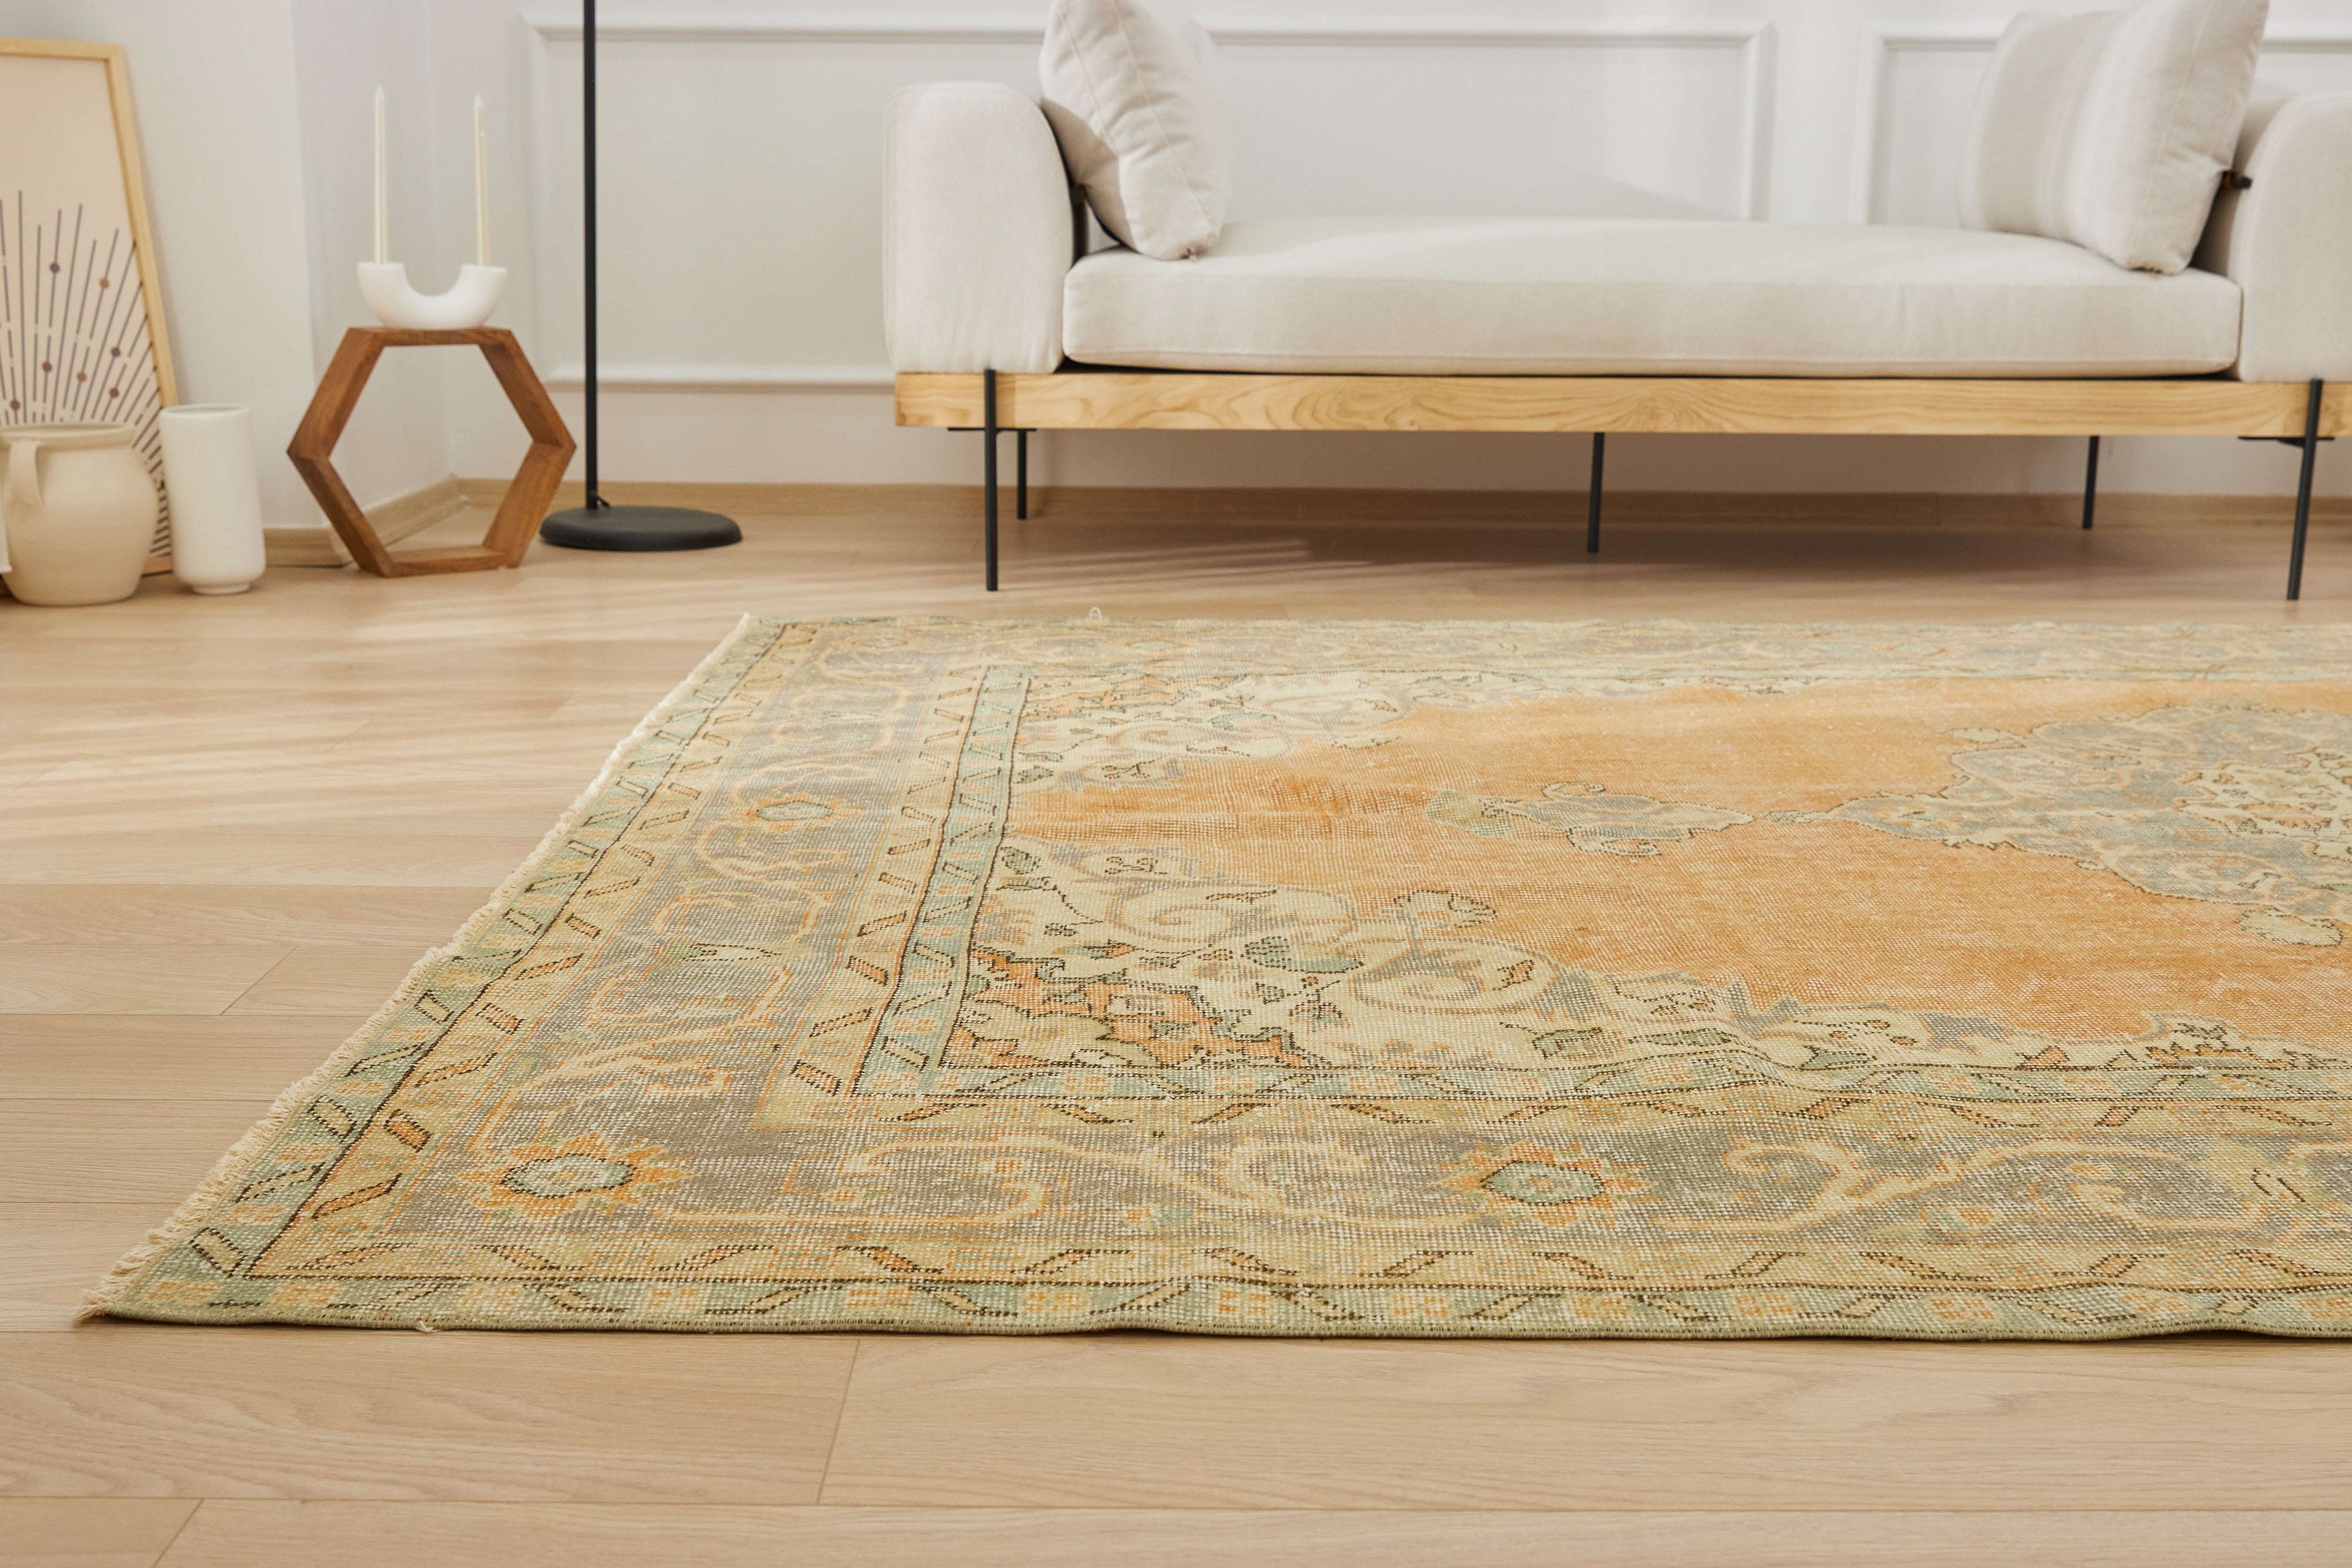 Mayleen's Essence | Authentic Turkish Rug | Hand-Knotted Carpet | Kuden Rugs